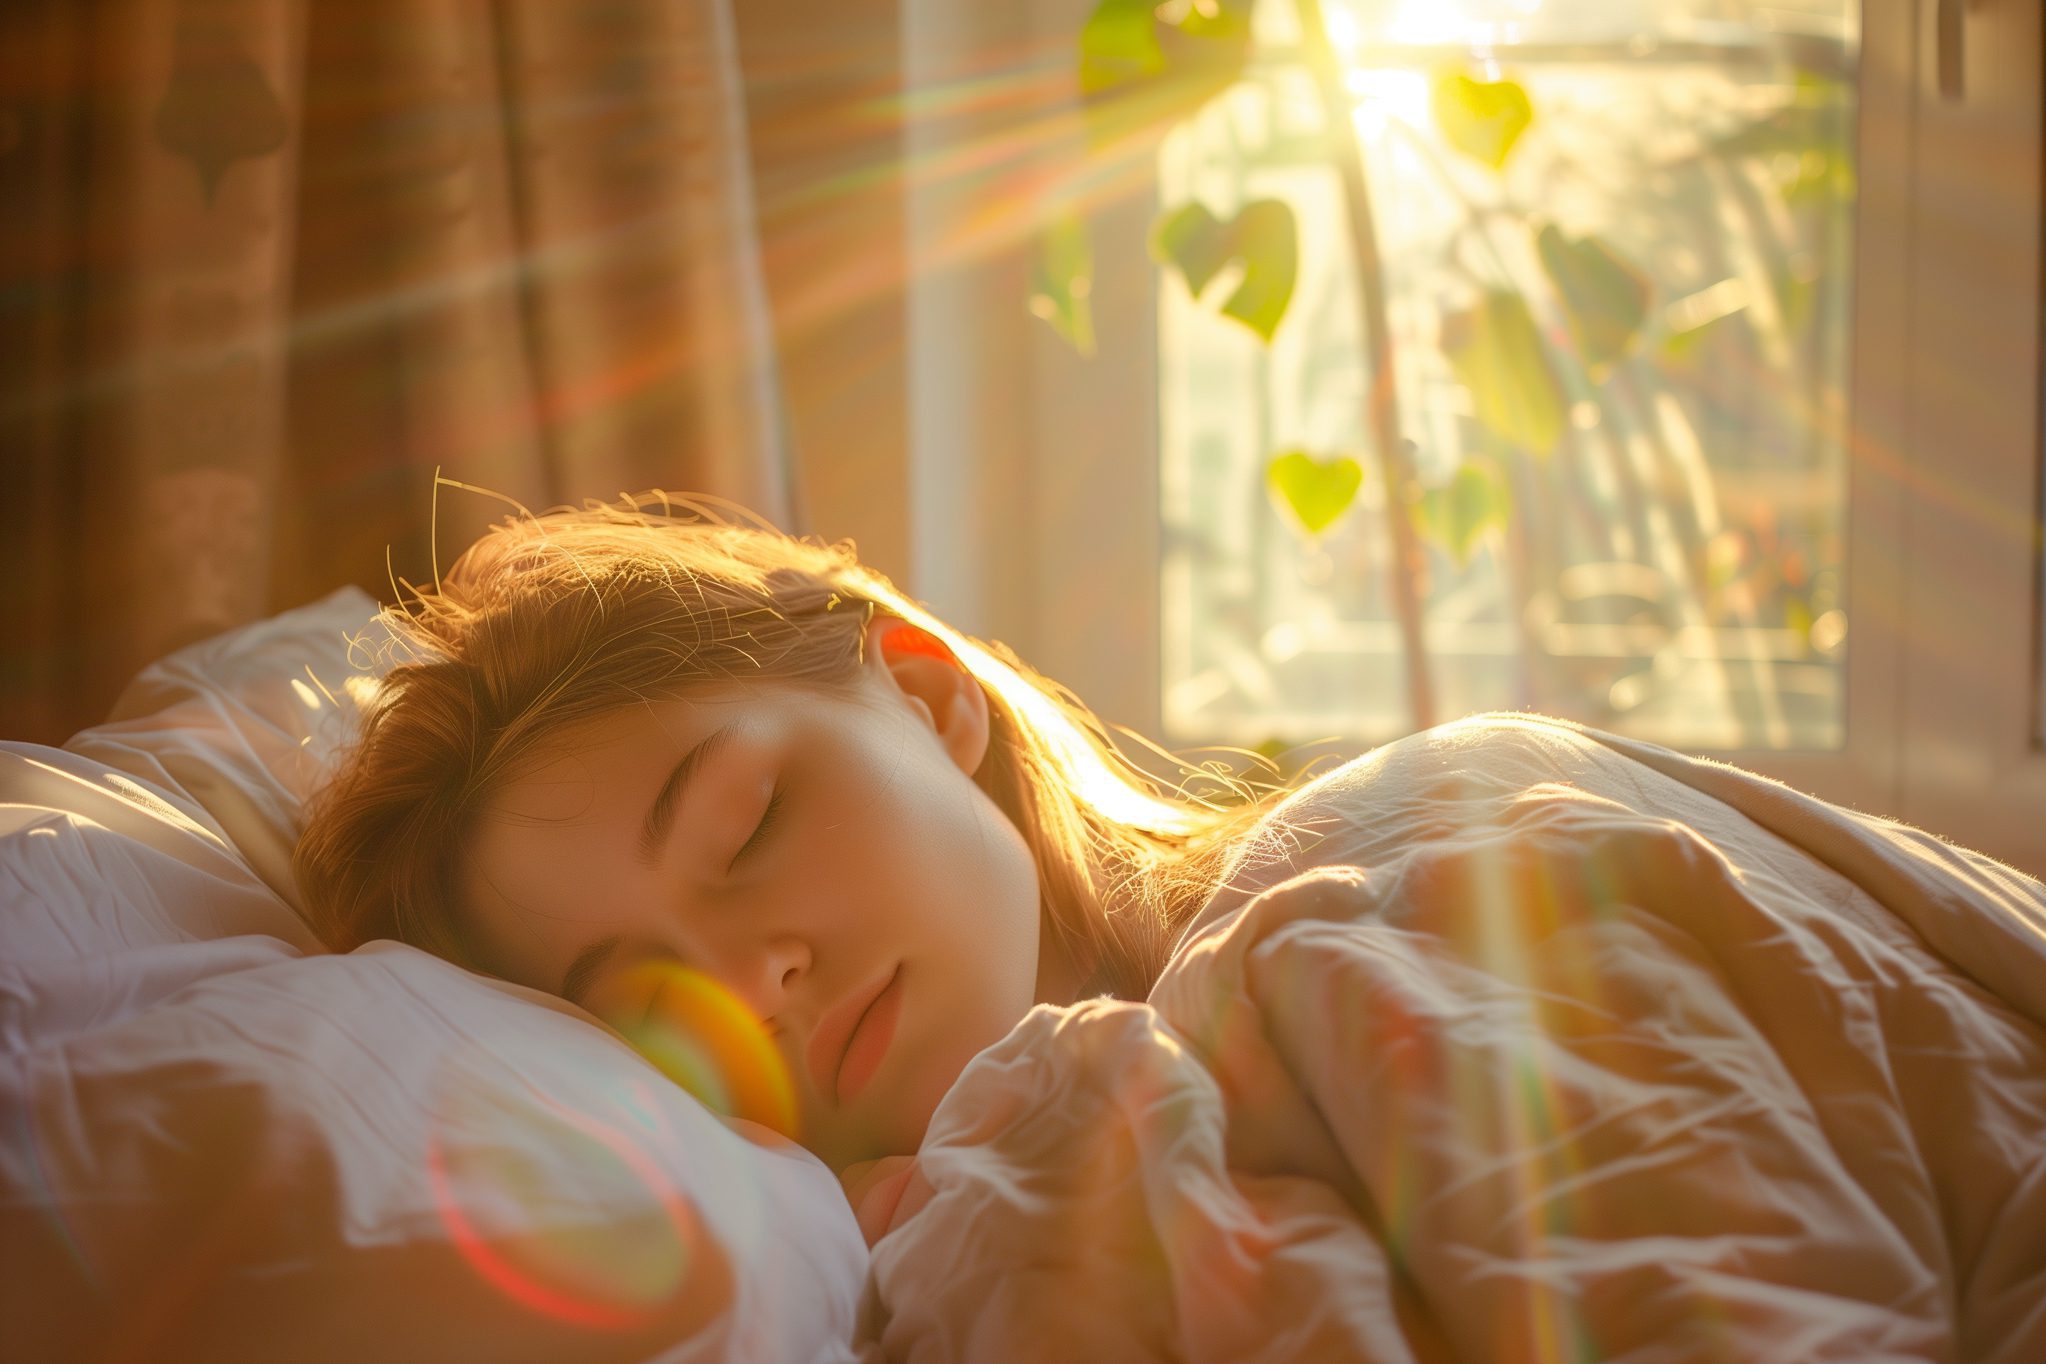 Is Oversleeping Dangerous? The Short Answer Is Yes